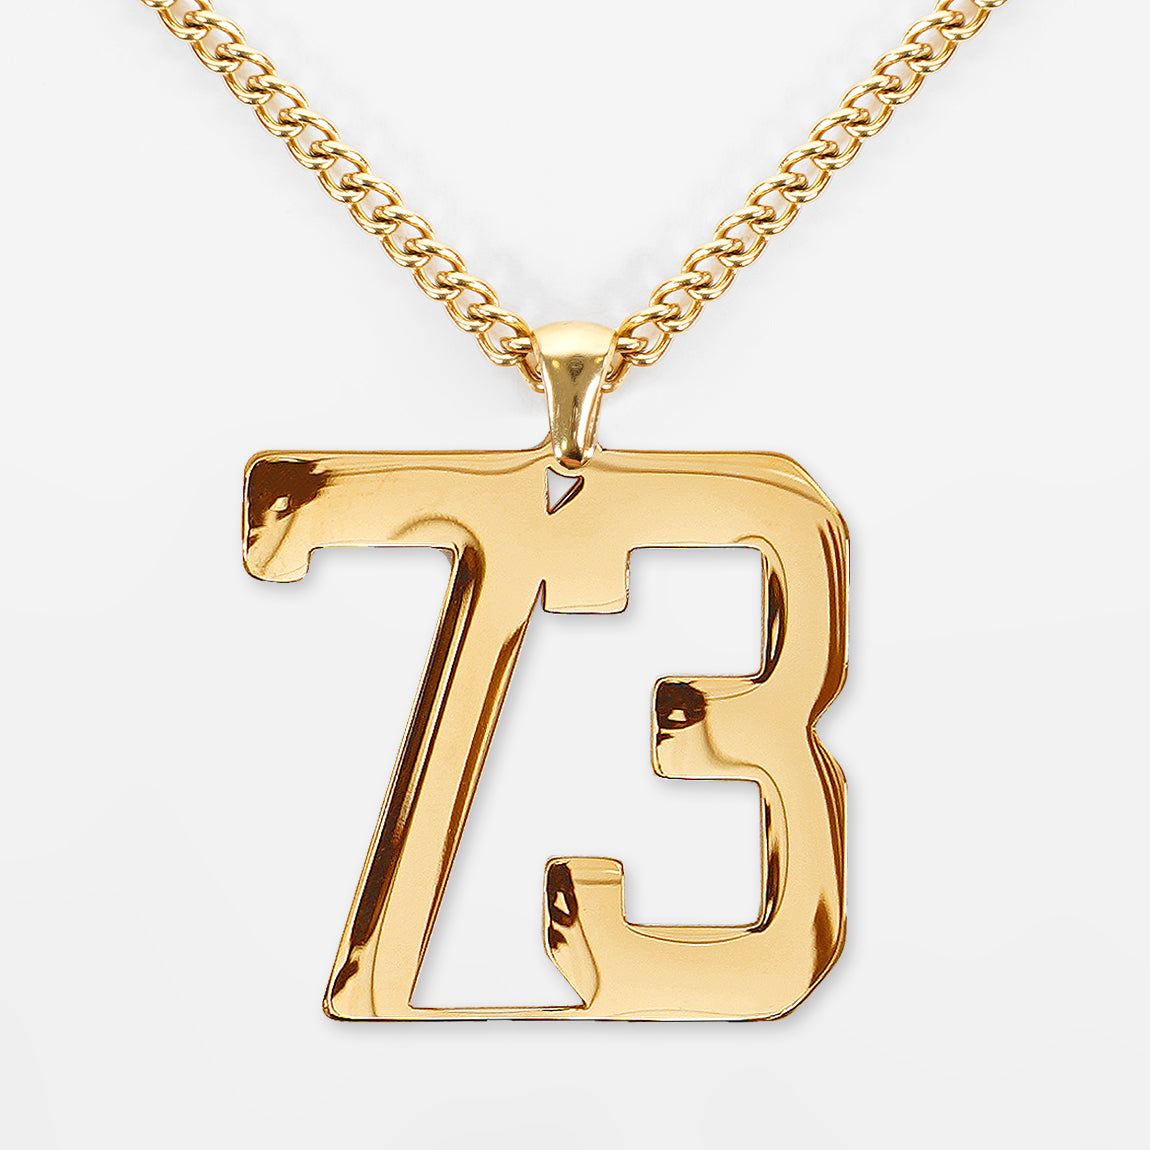 73 Number Pendant with Chain Necklace - Gold Plated Stainless Steel